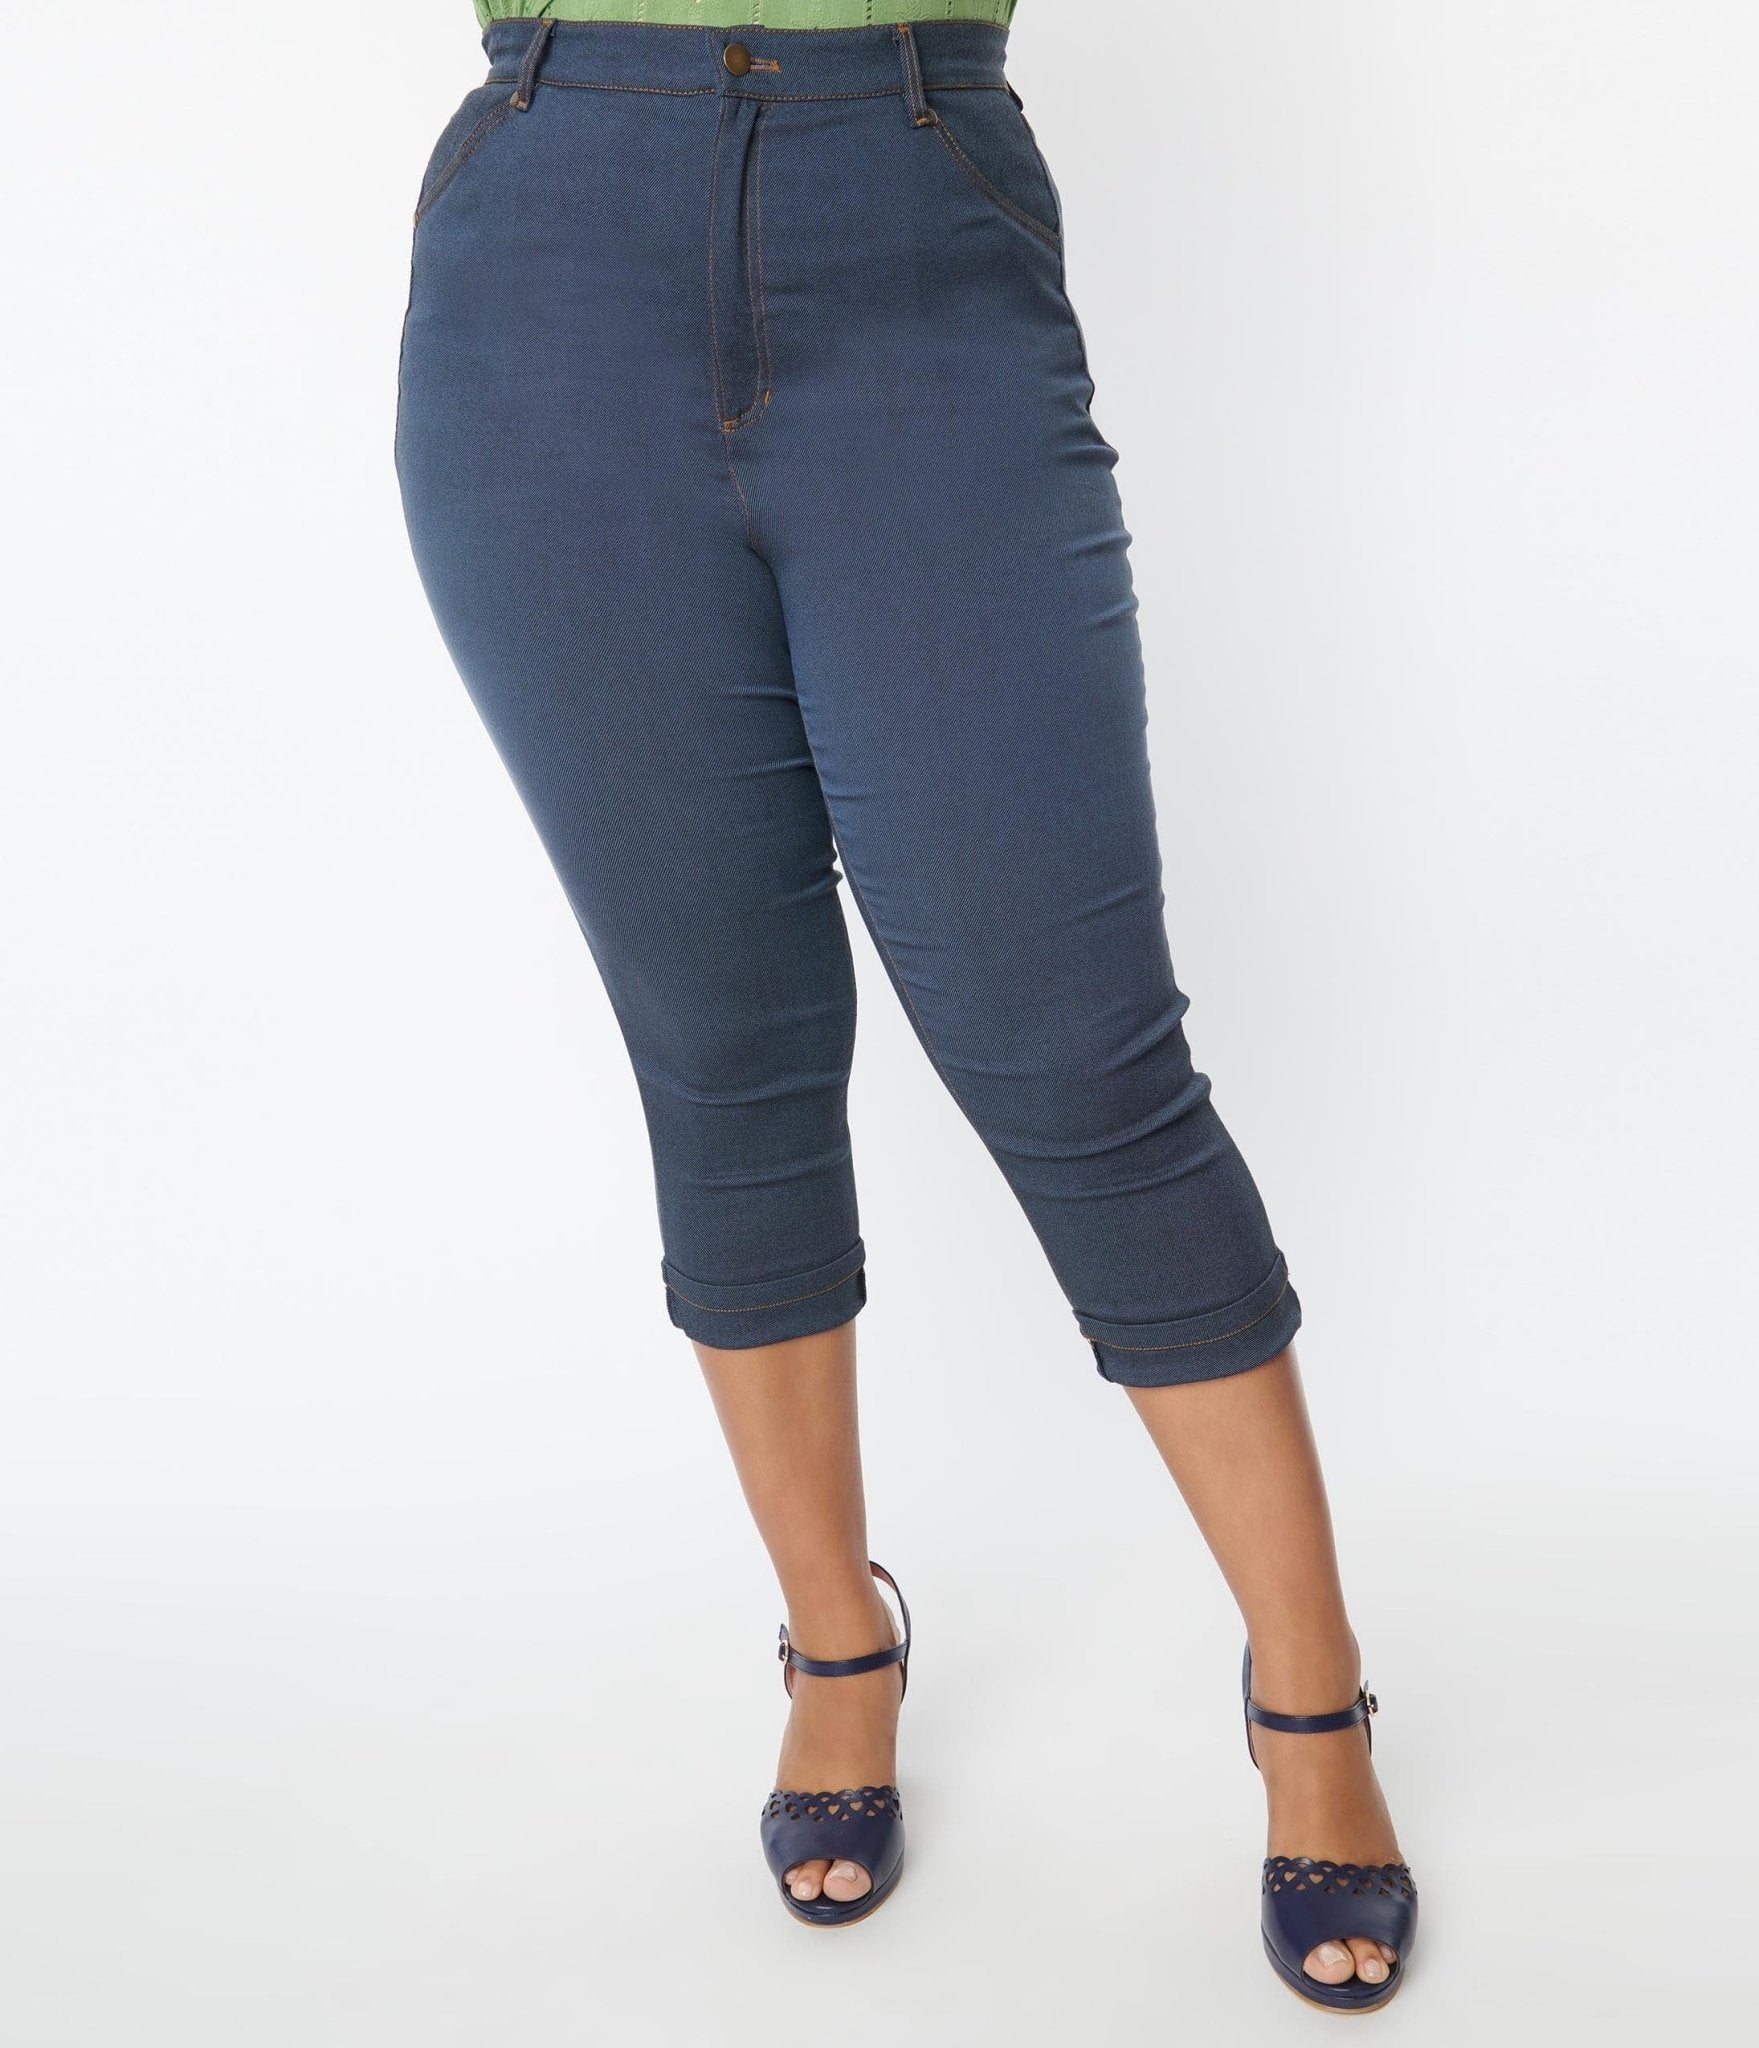 Retro Loose Plus Size Cropped Trousers at Rs 1950.00, Girls Trouser